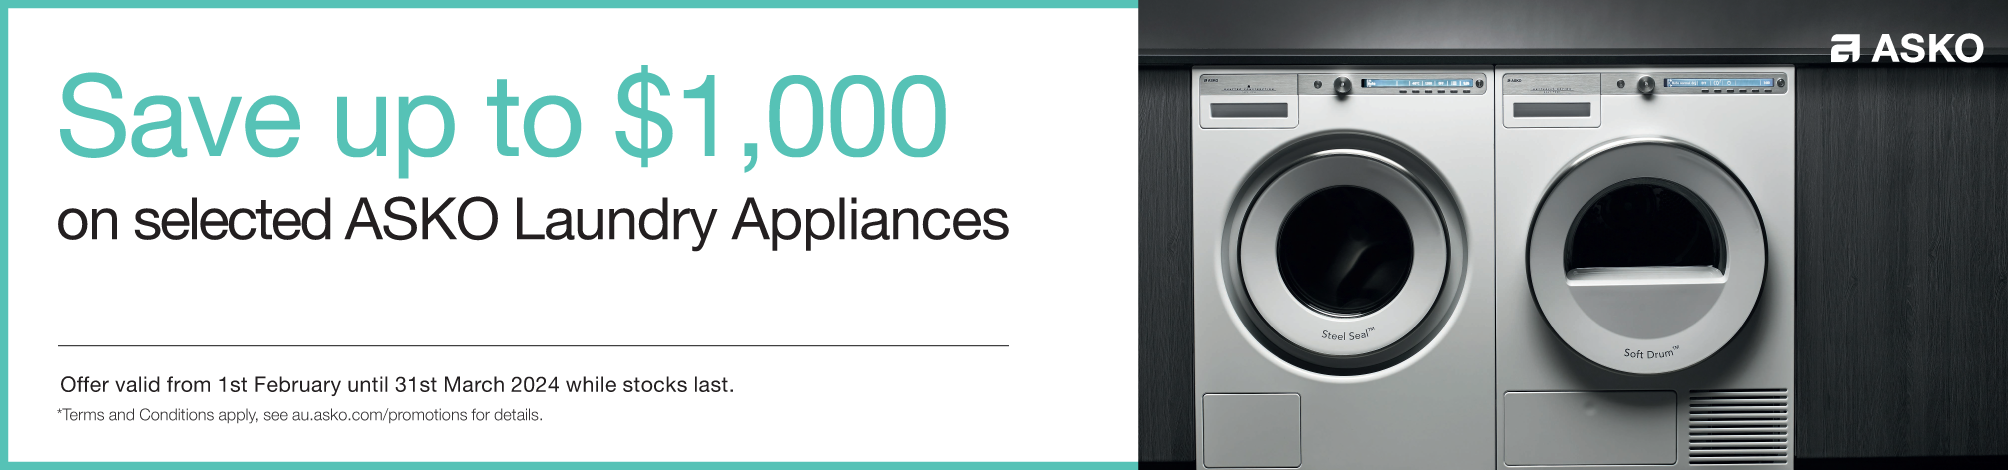 Save Up To $1,000 On Selected ASKO Laundry Appliances